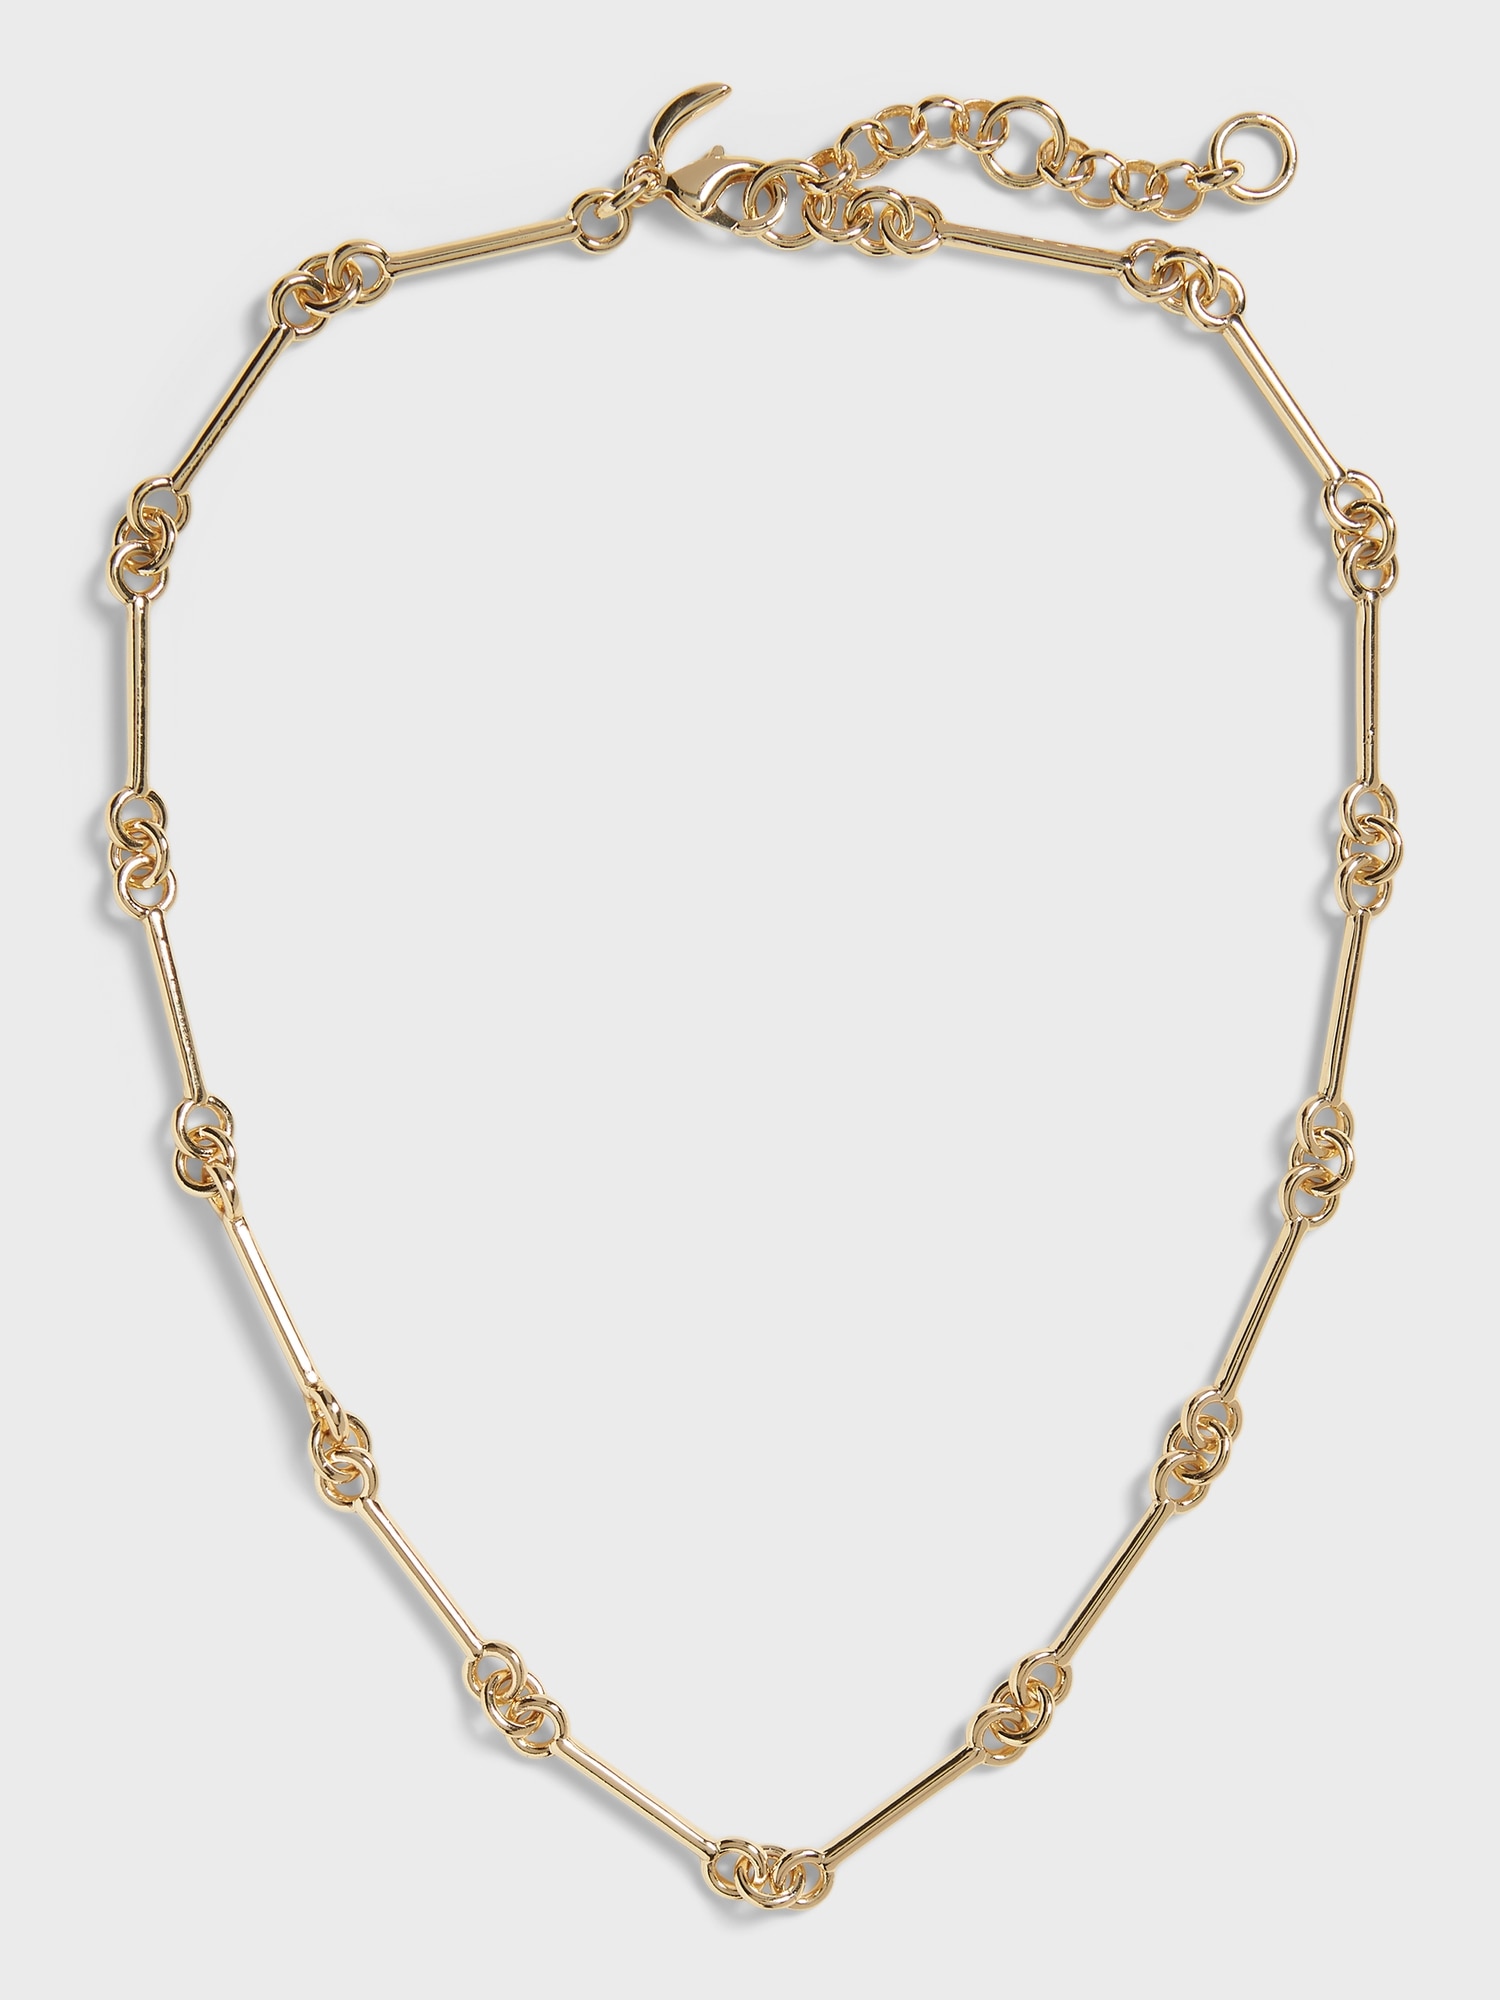 Interlinked Single Chain Necklace